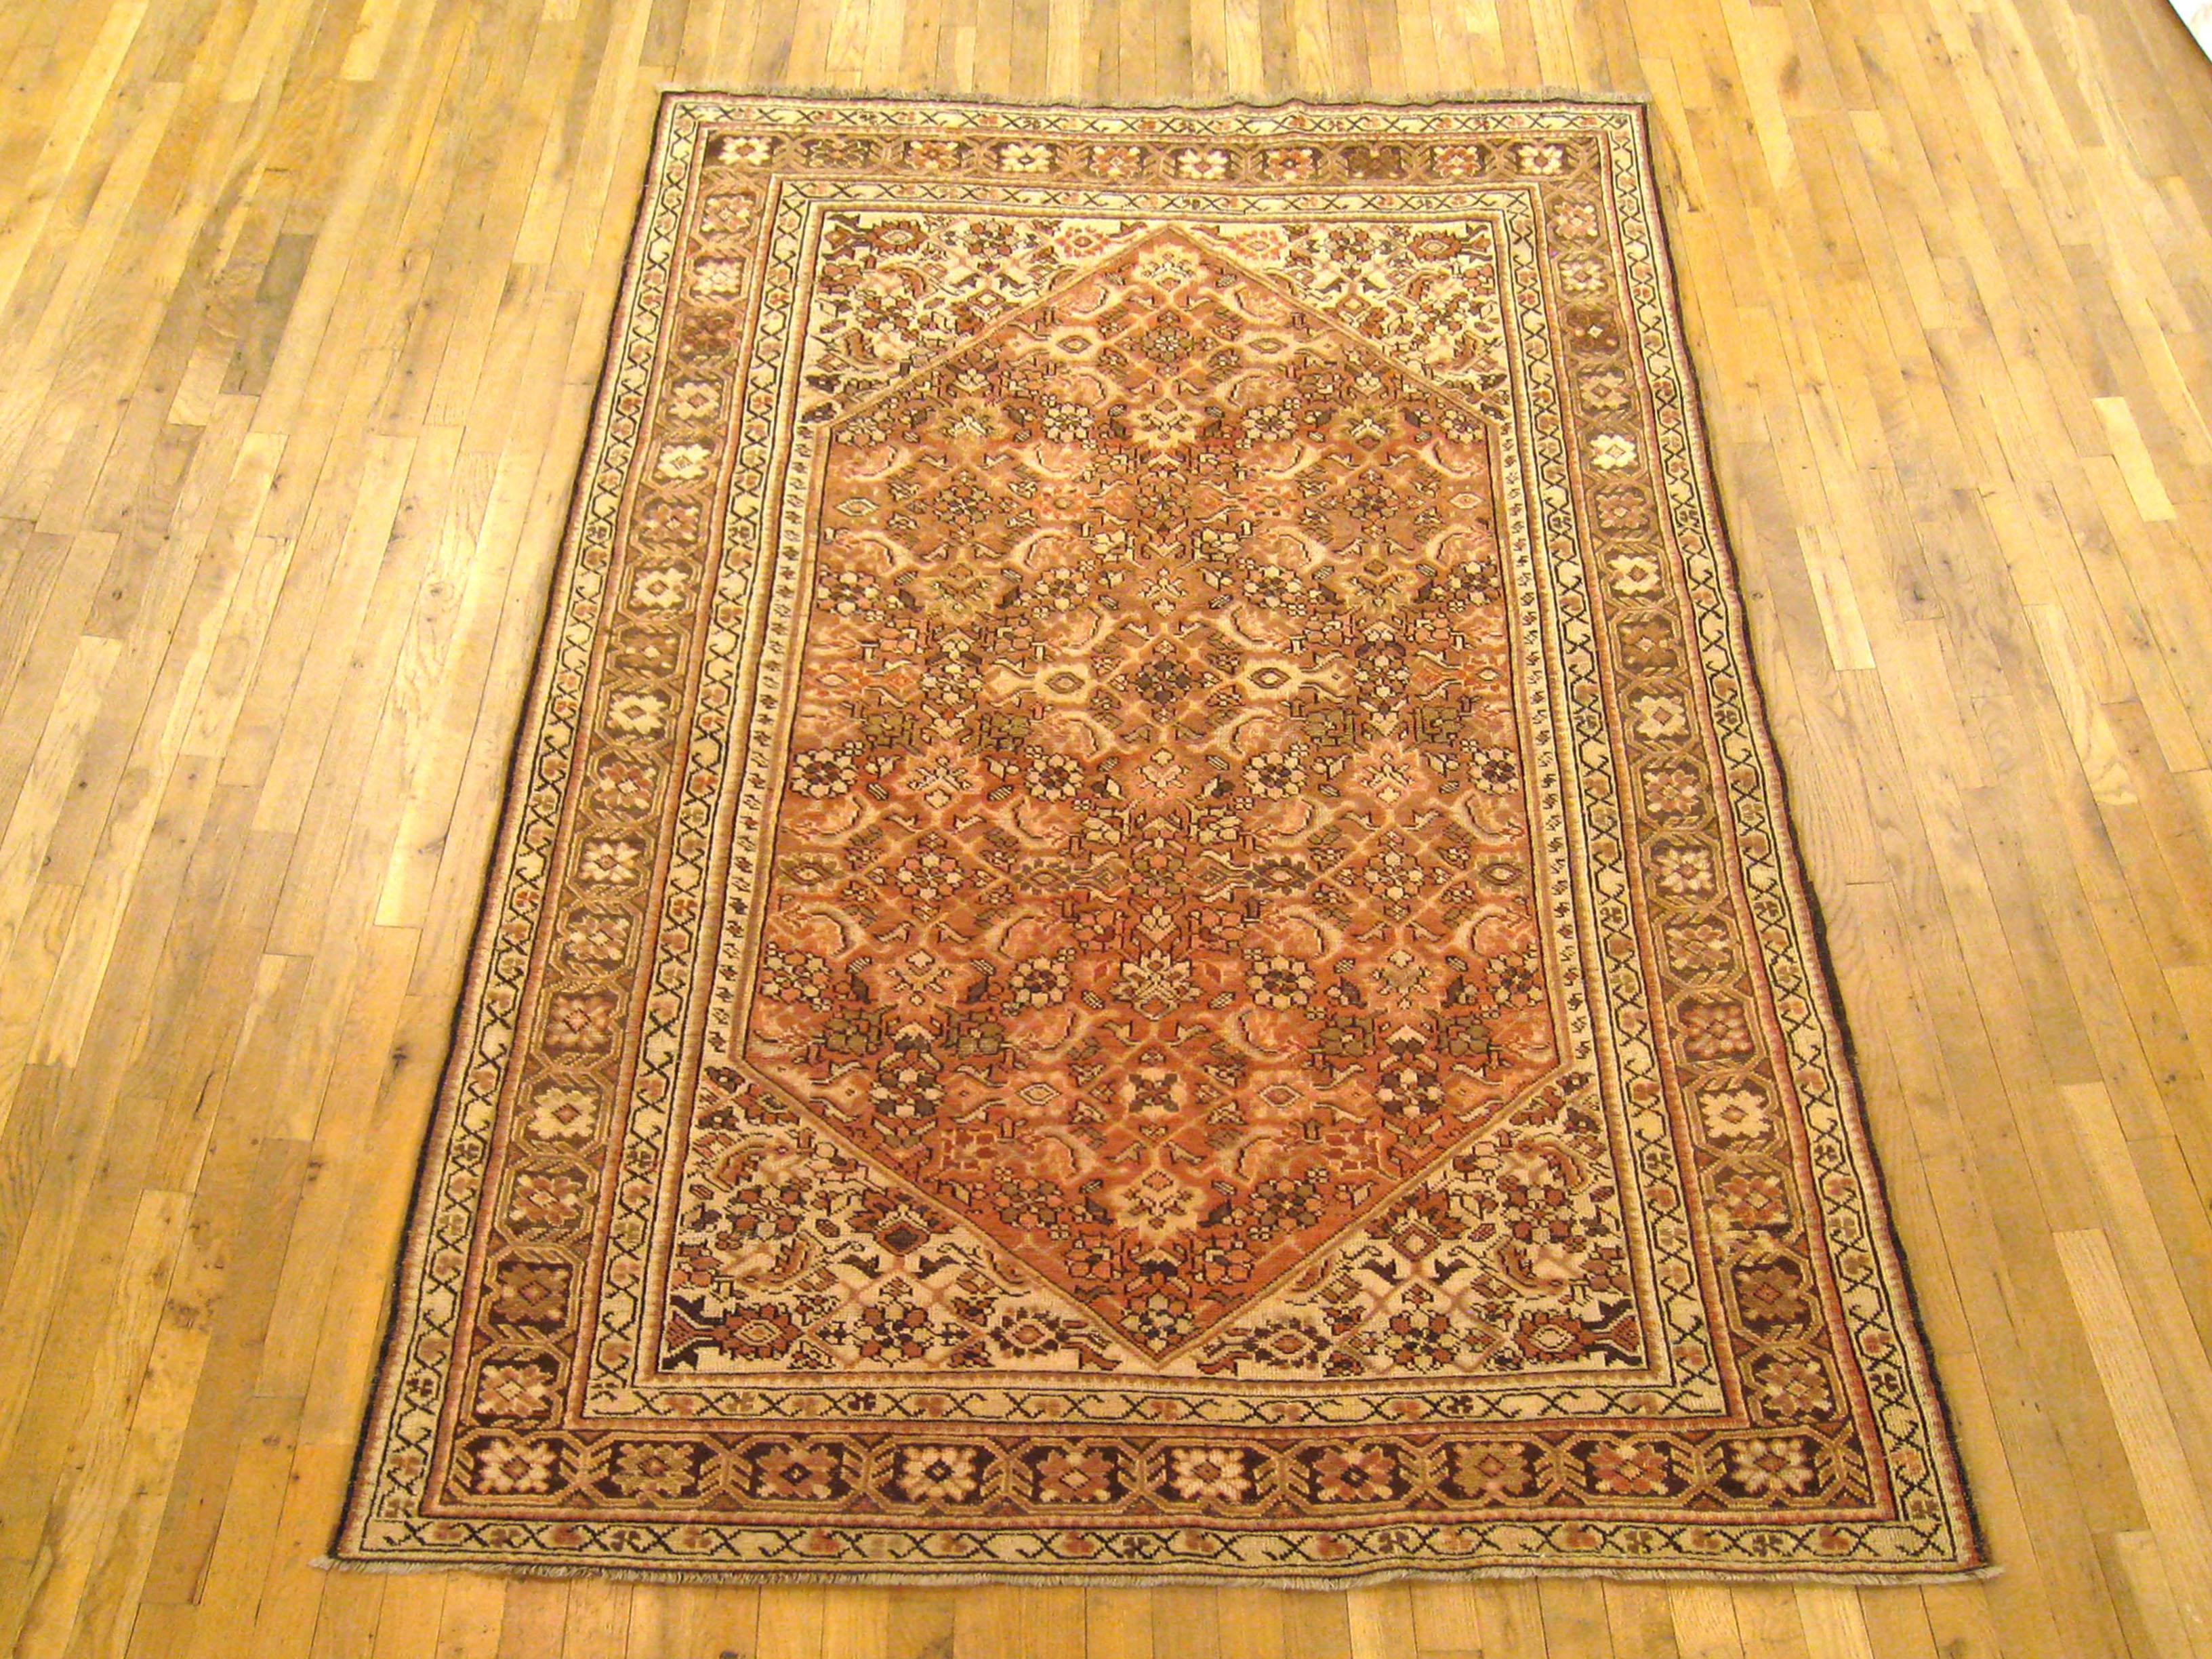 Antique Caucasian Karabagh rug, Room size, circa 1910

A one-of-a-kind antique Caucasian Karabagh Carpet, hand-knotted with soft wool pile. This lovely hand-knotted carpet features an Herati design allover the coral primary field, with a navy